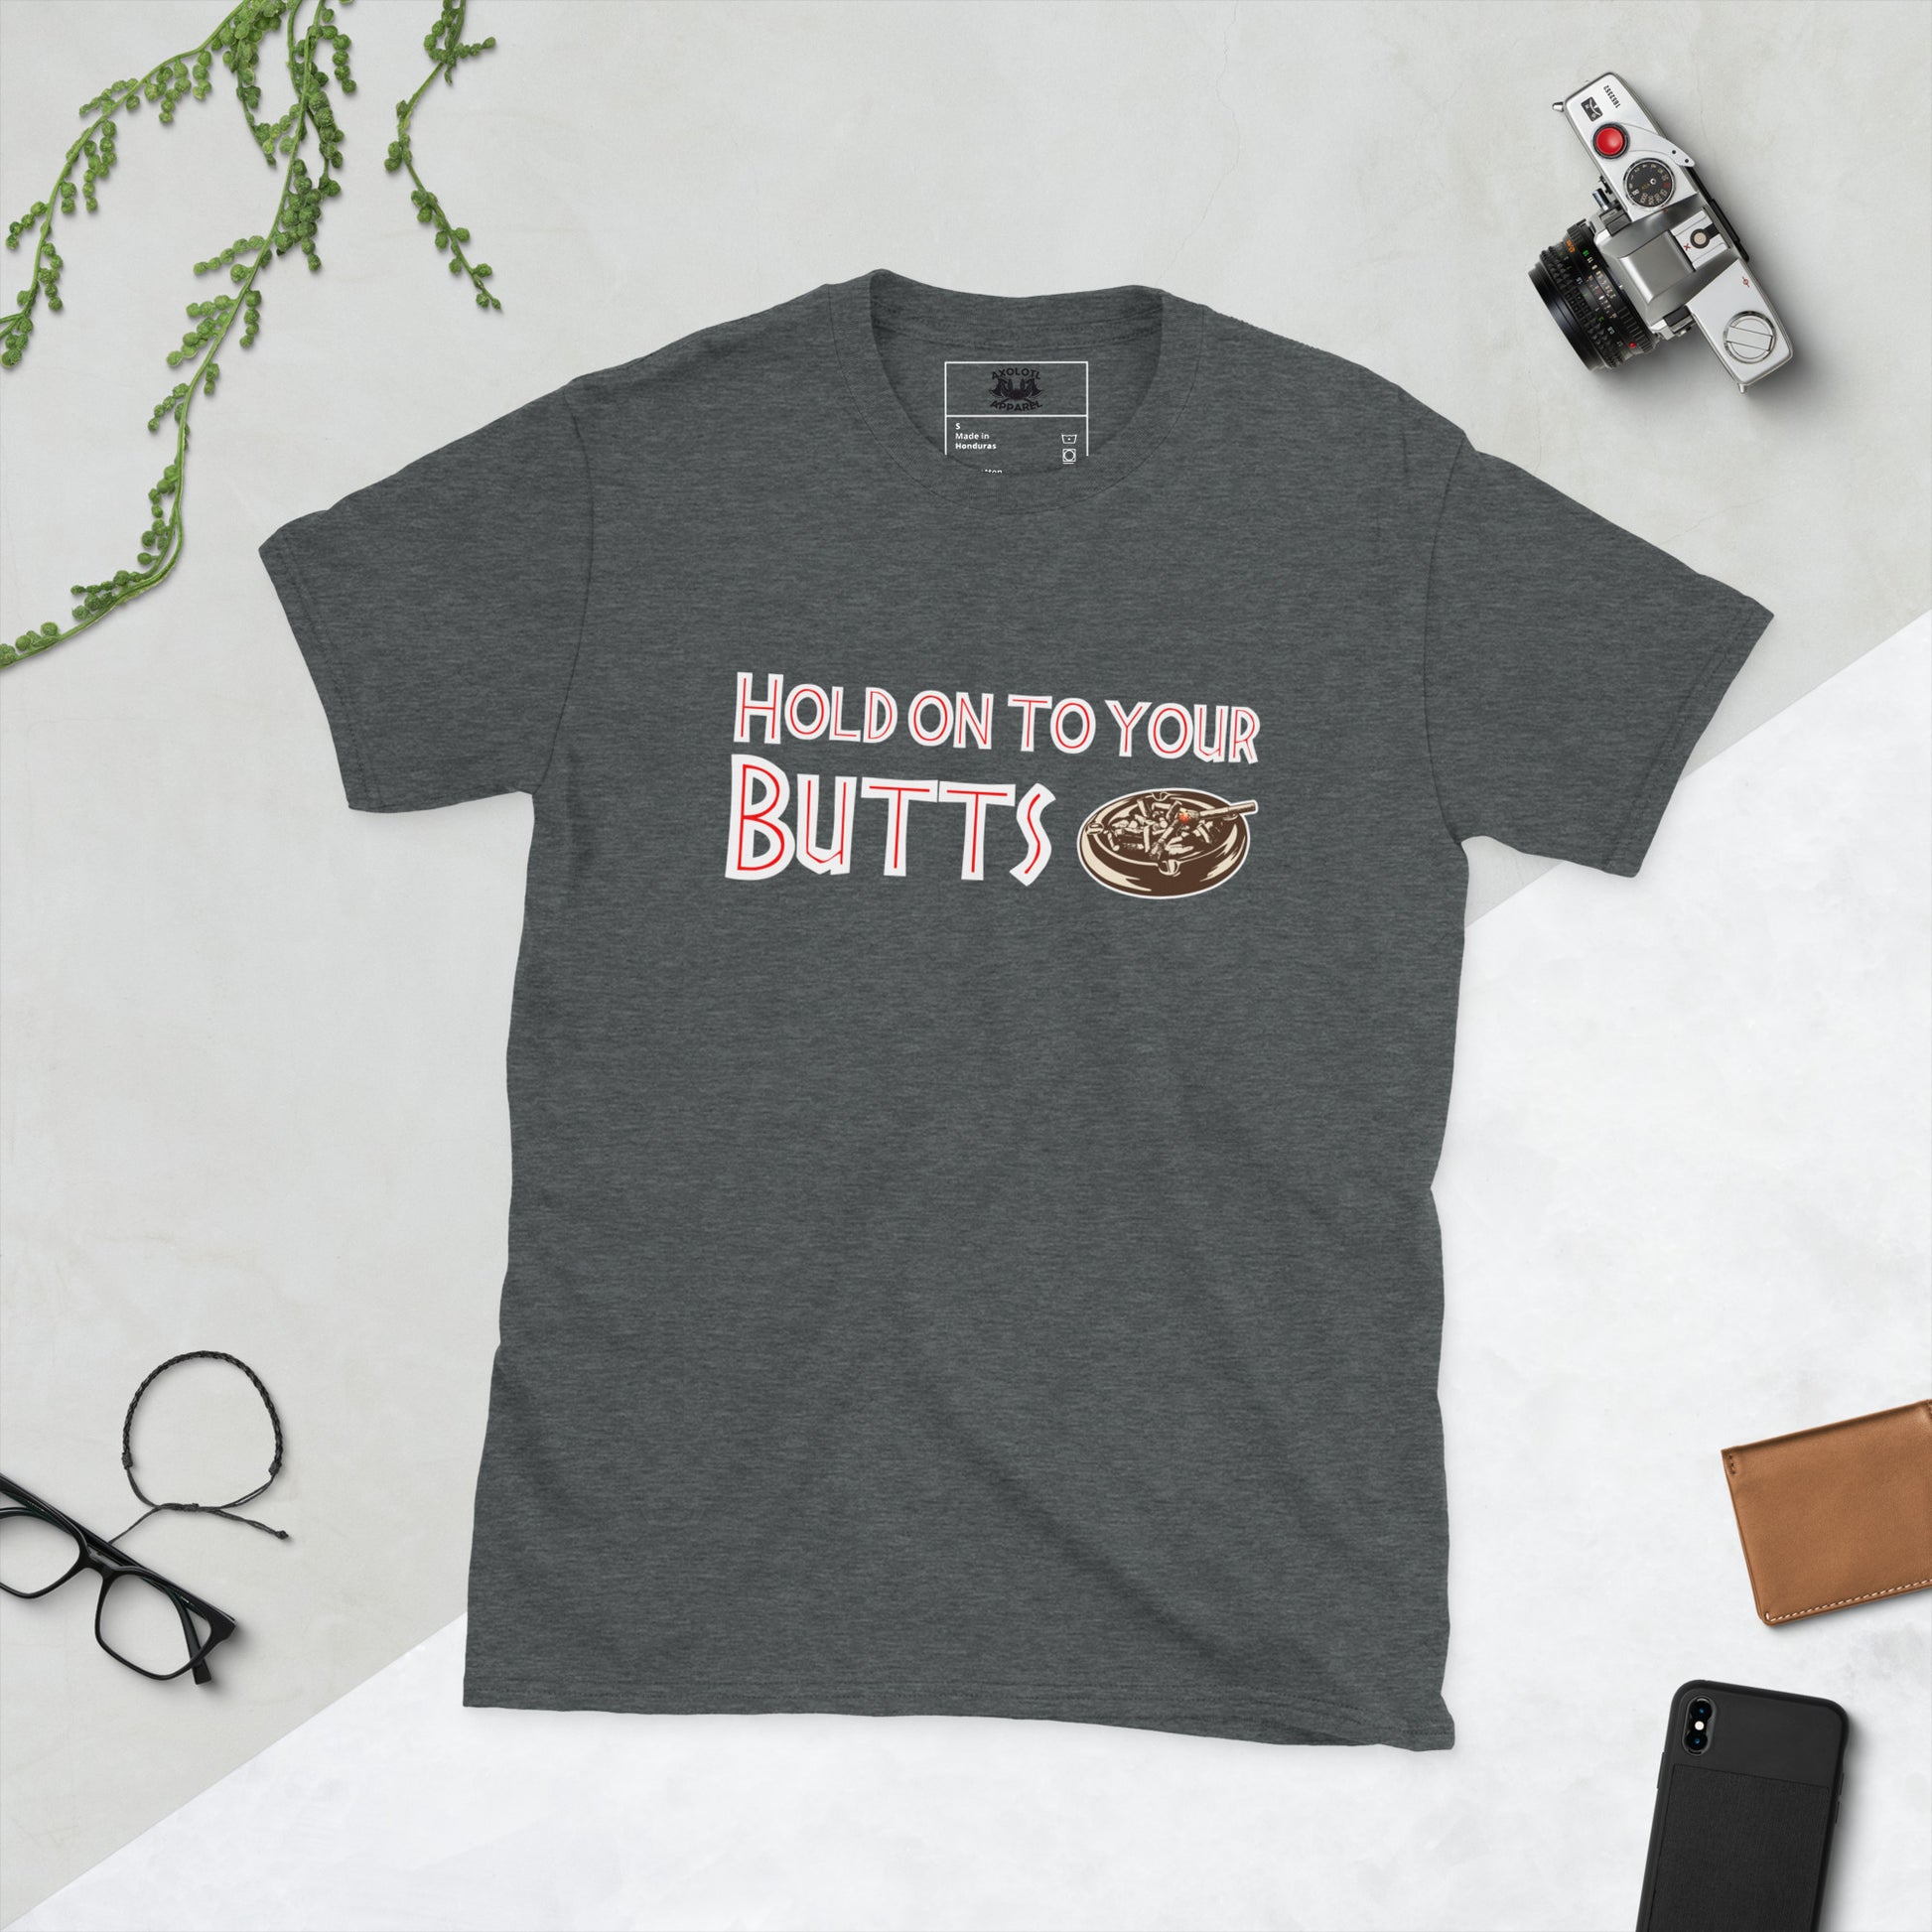 Hold on to your butts short-sleeve unisex t-shirt grey flat